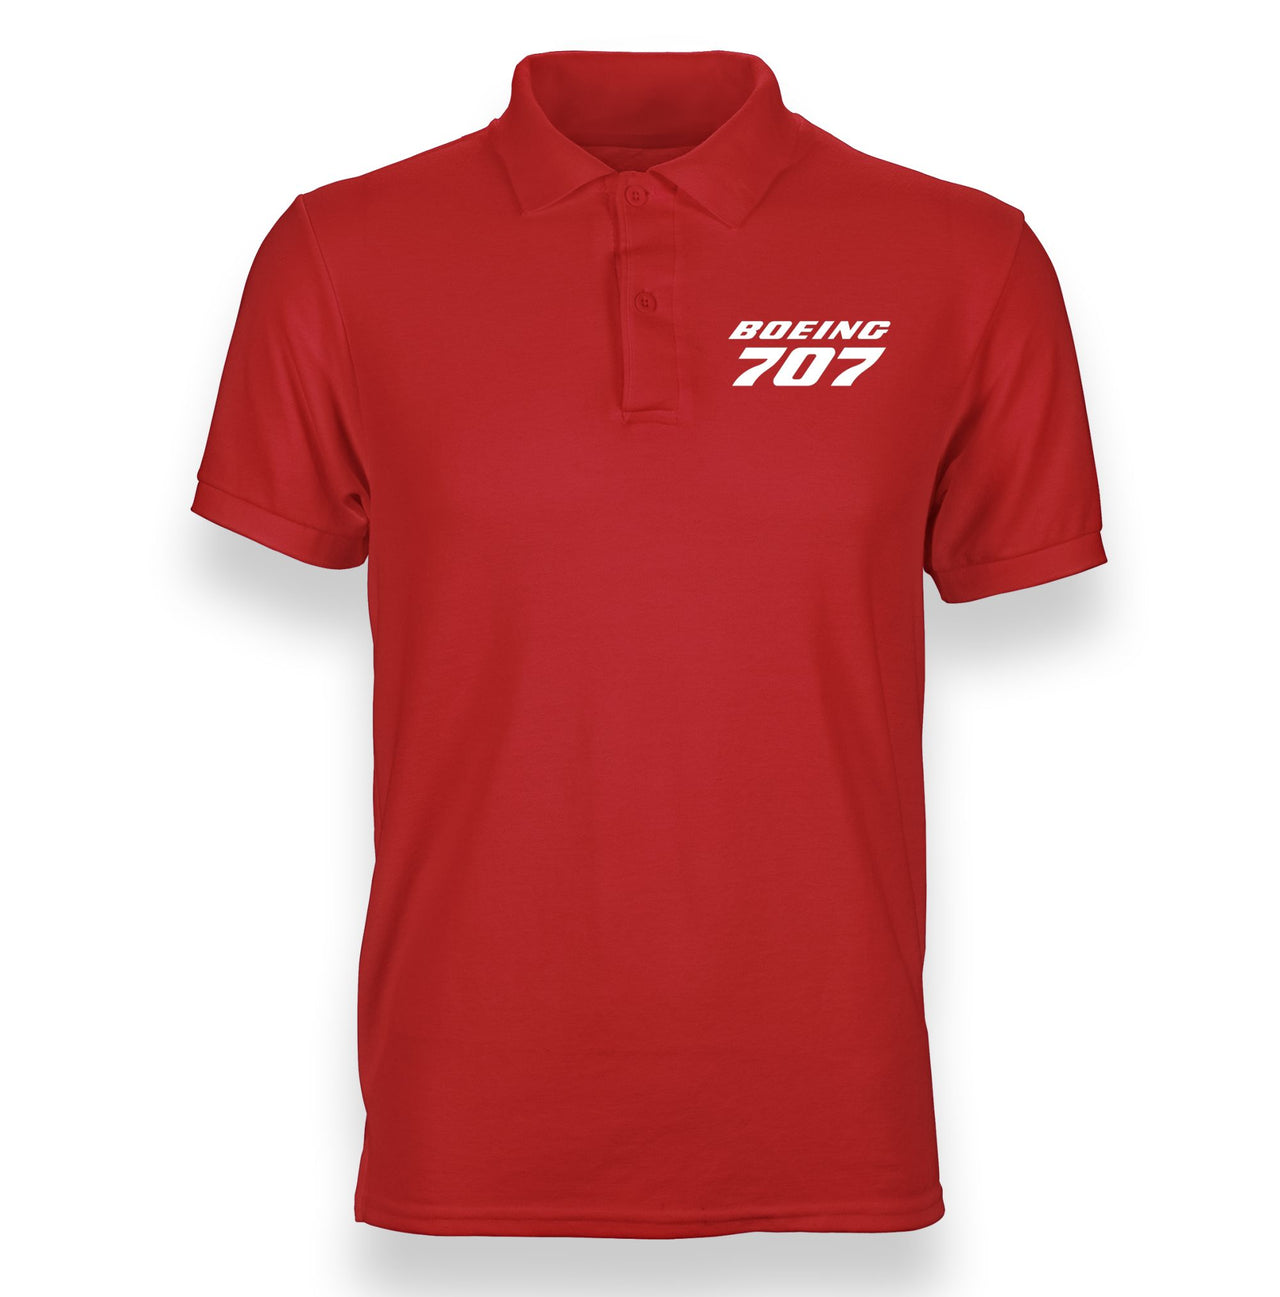 Boeing 707 & Text Designed "WOMEN" Polo T-Shirts